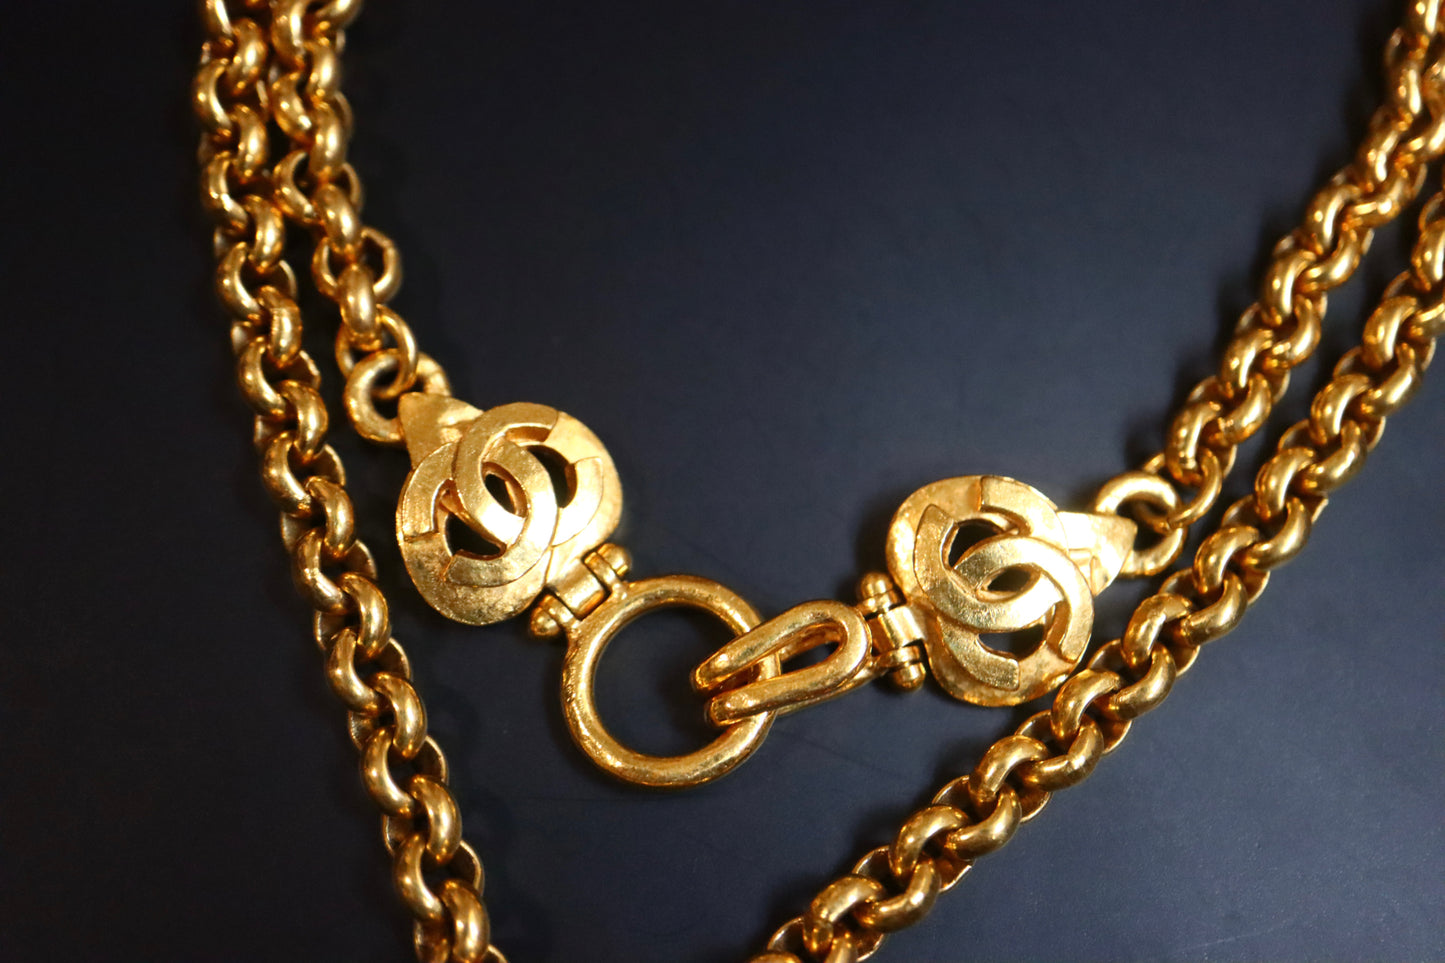 Vintage Chanel 1997 gold chain mirror long necklace